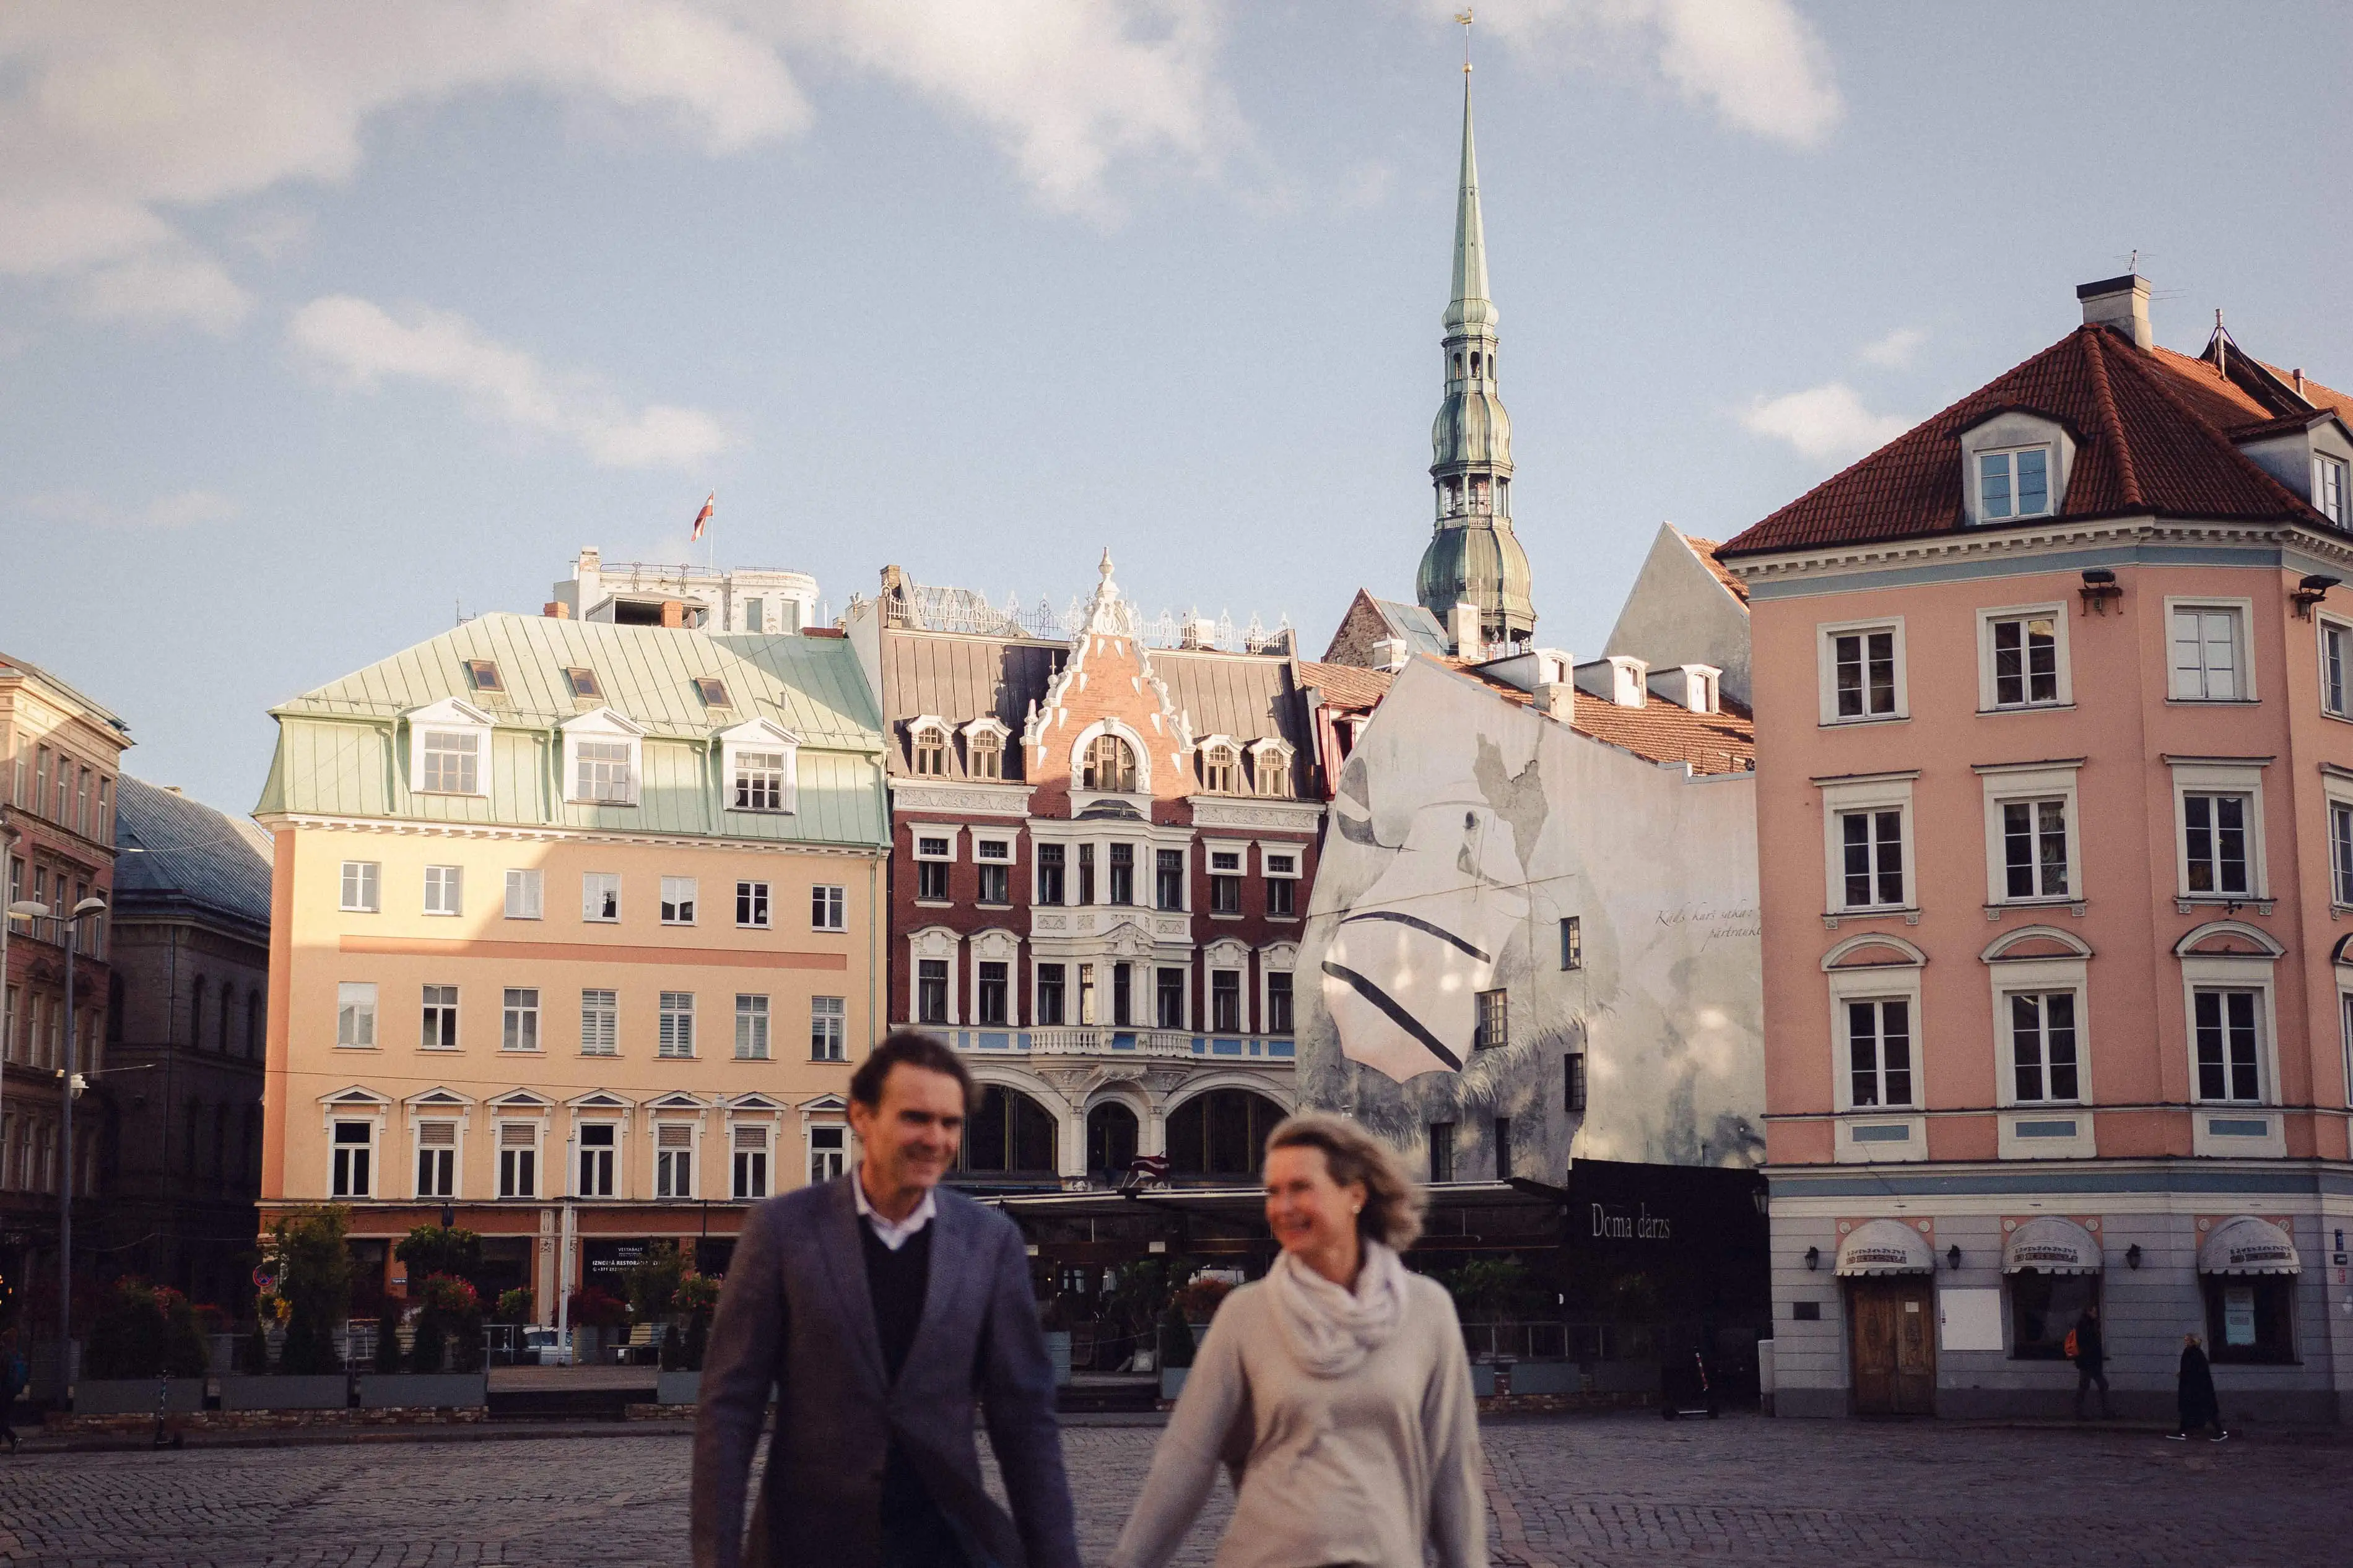 Tourist Numbers in Riga Increased by 15 Percent in May - Germany Regains Top Position